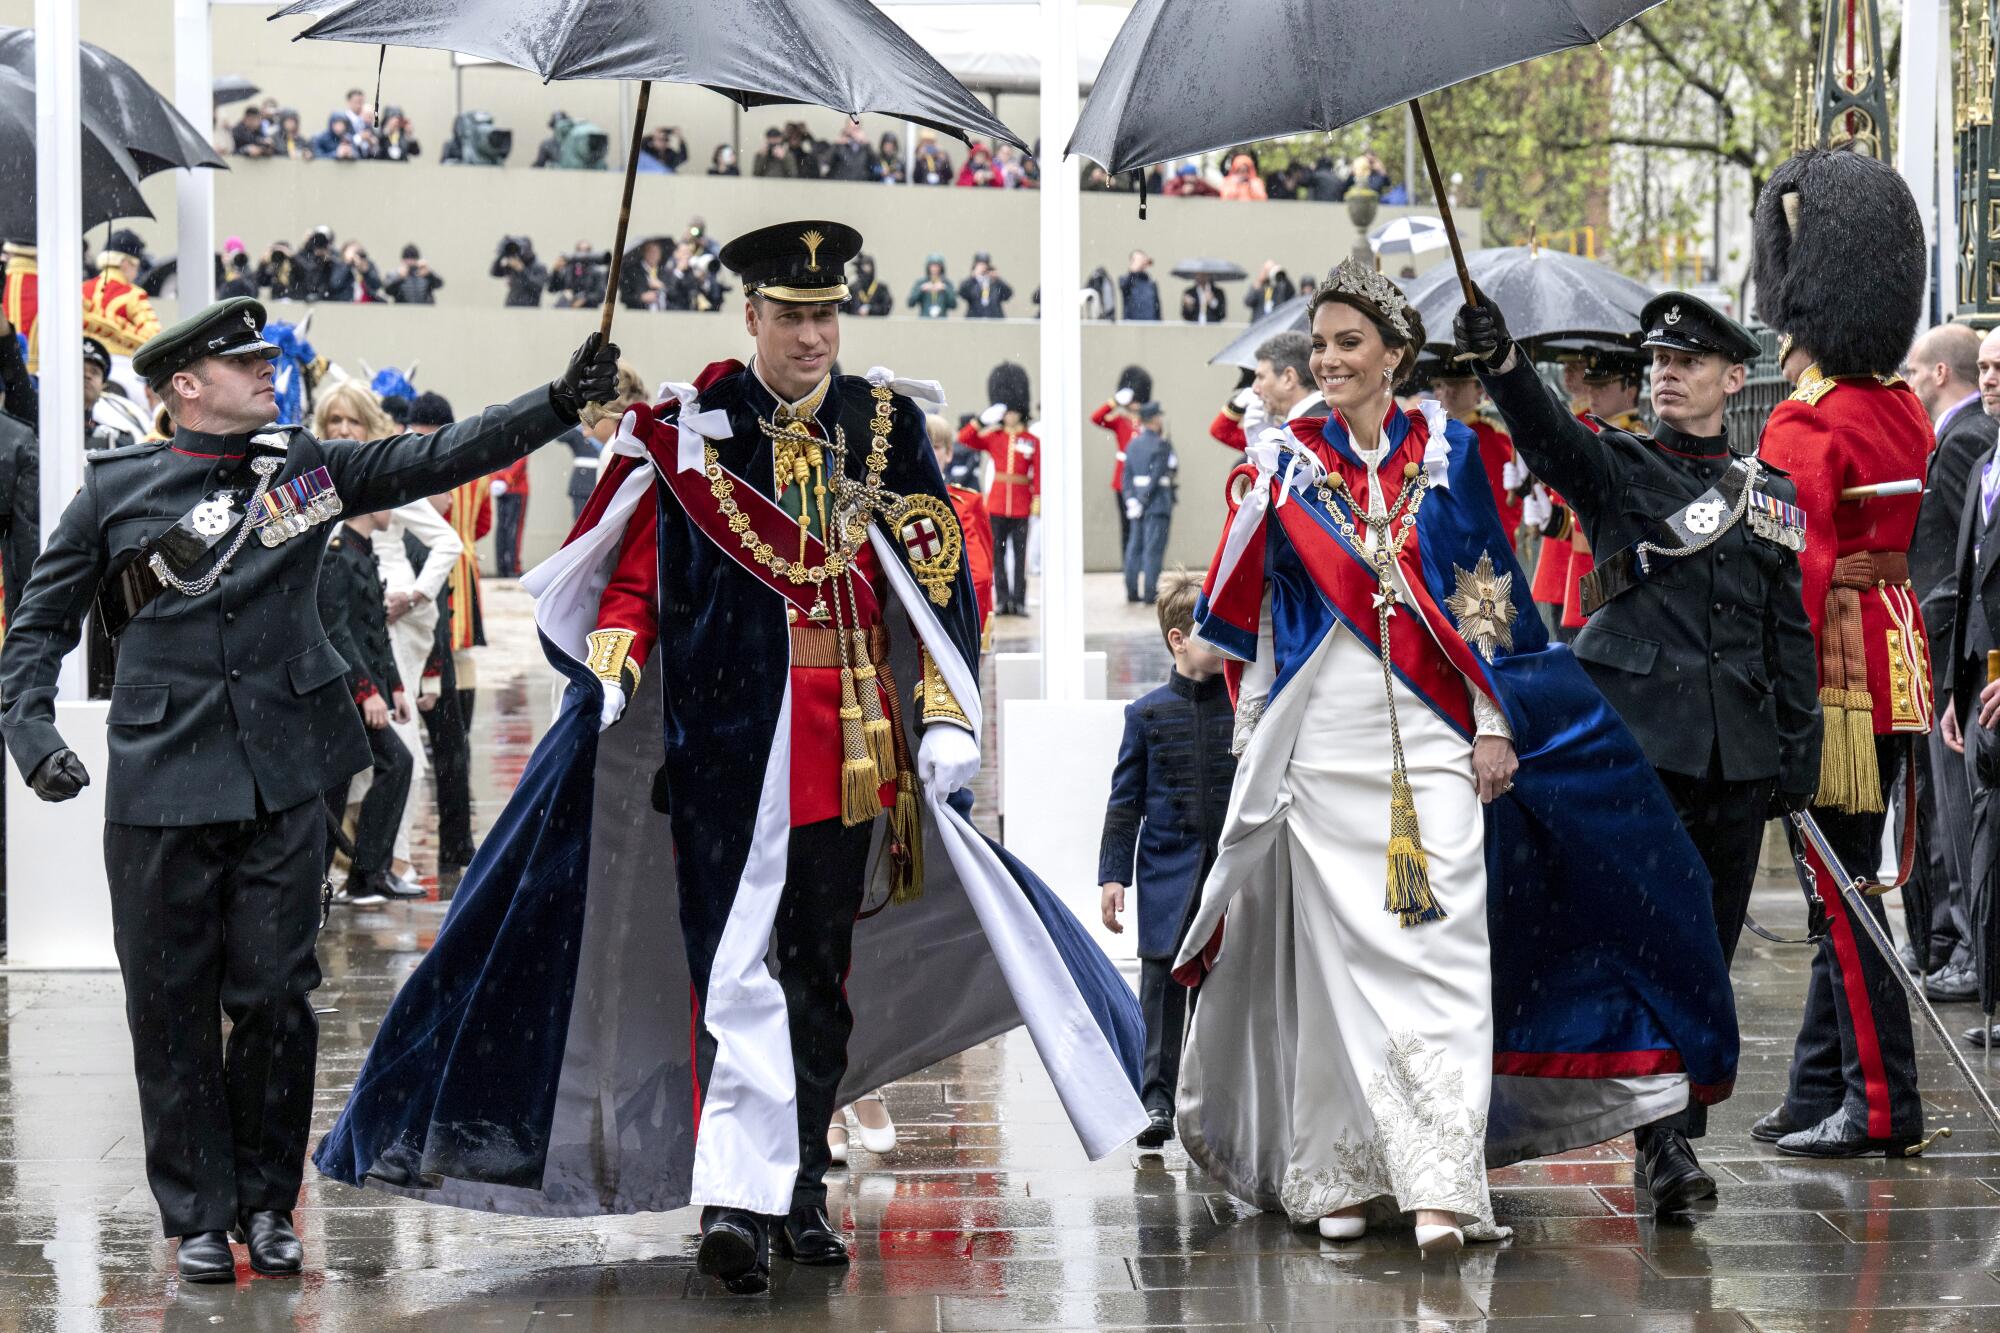 Britain's Prince William and Kate, Princess of Wales walk together, shielded from rain by two officers holding umbrellas